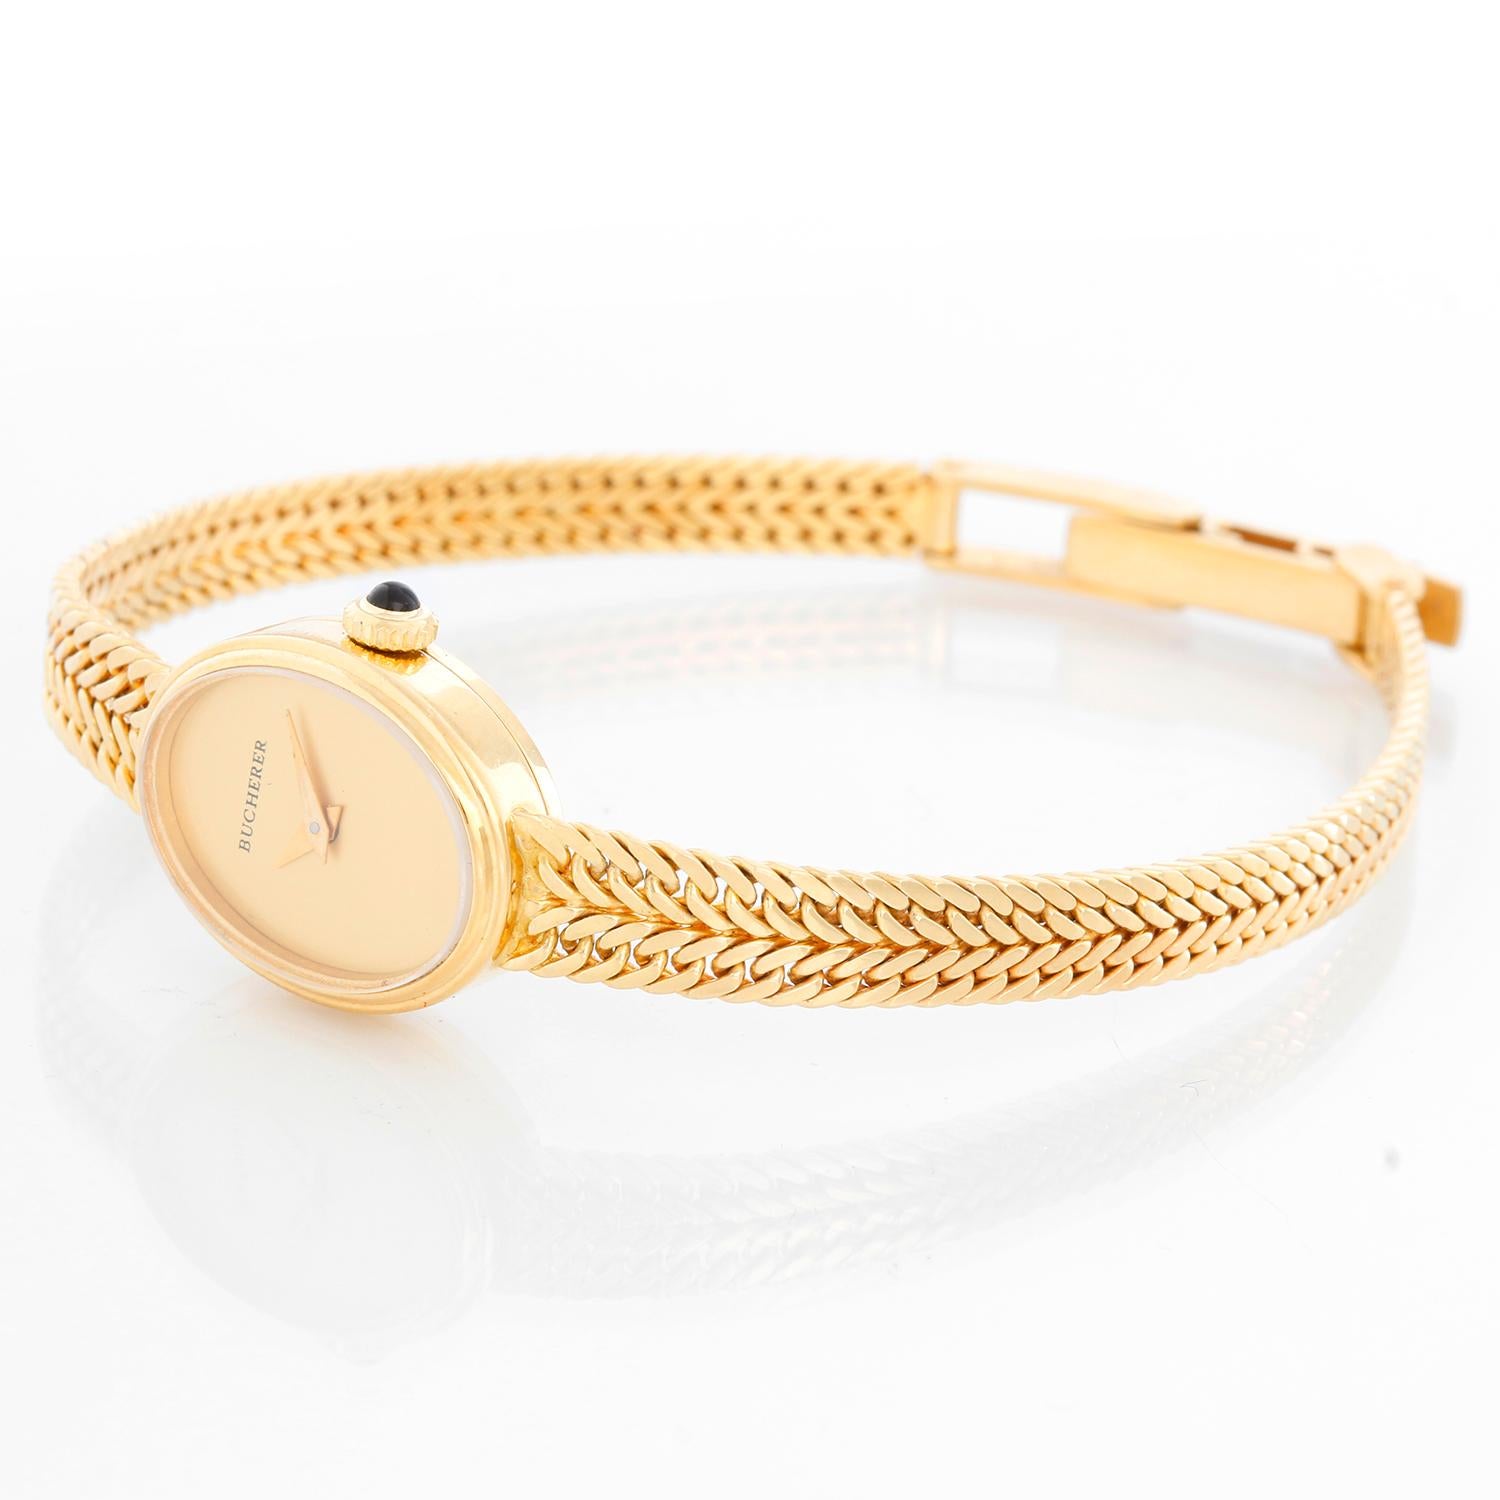 Vintage Ladies 18k Yellow Gold Bucherer Watch - Manual. 18k Yellow Gold (16 x 19 mm). Champagne dial. 18K yellow gold bracelet with adjustable clasp; will fit up to a 6 1/2 inch wrist. Pre-owned with Bucherer box. 